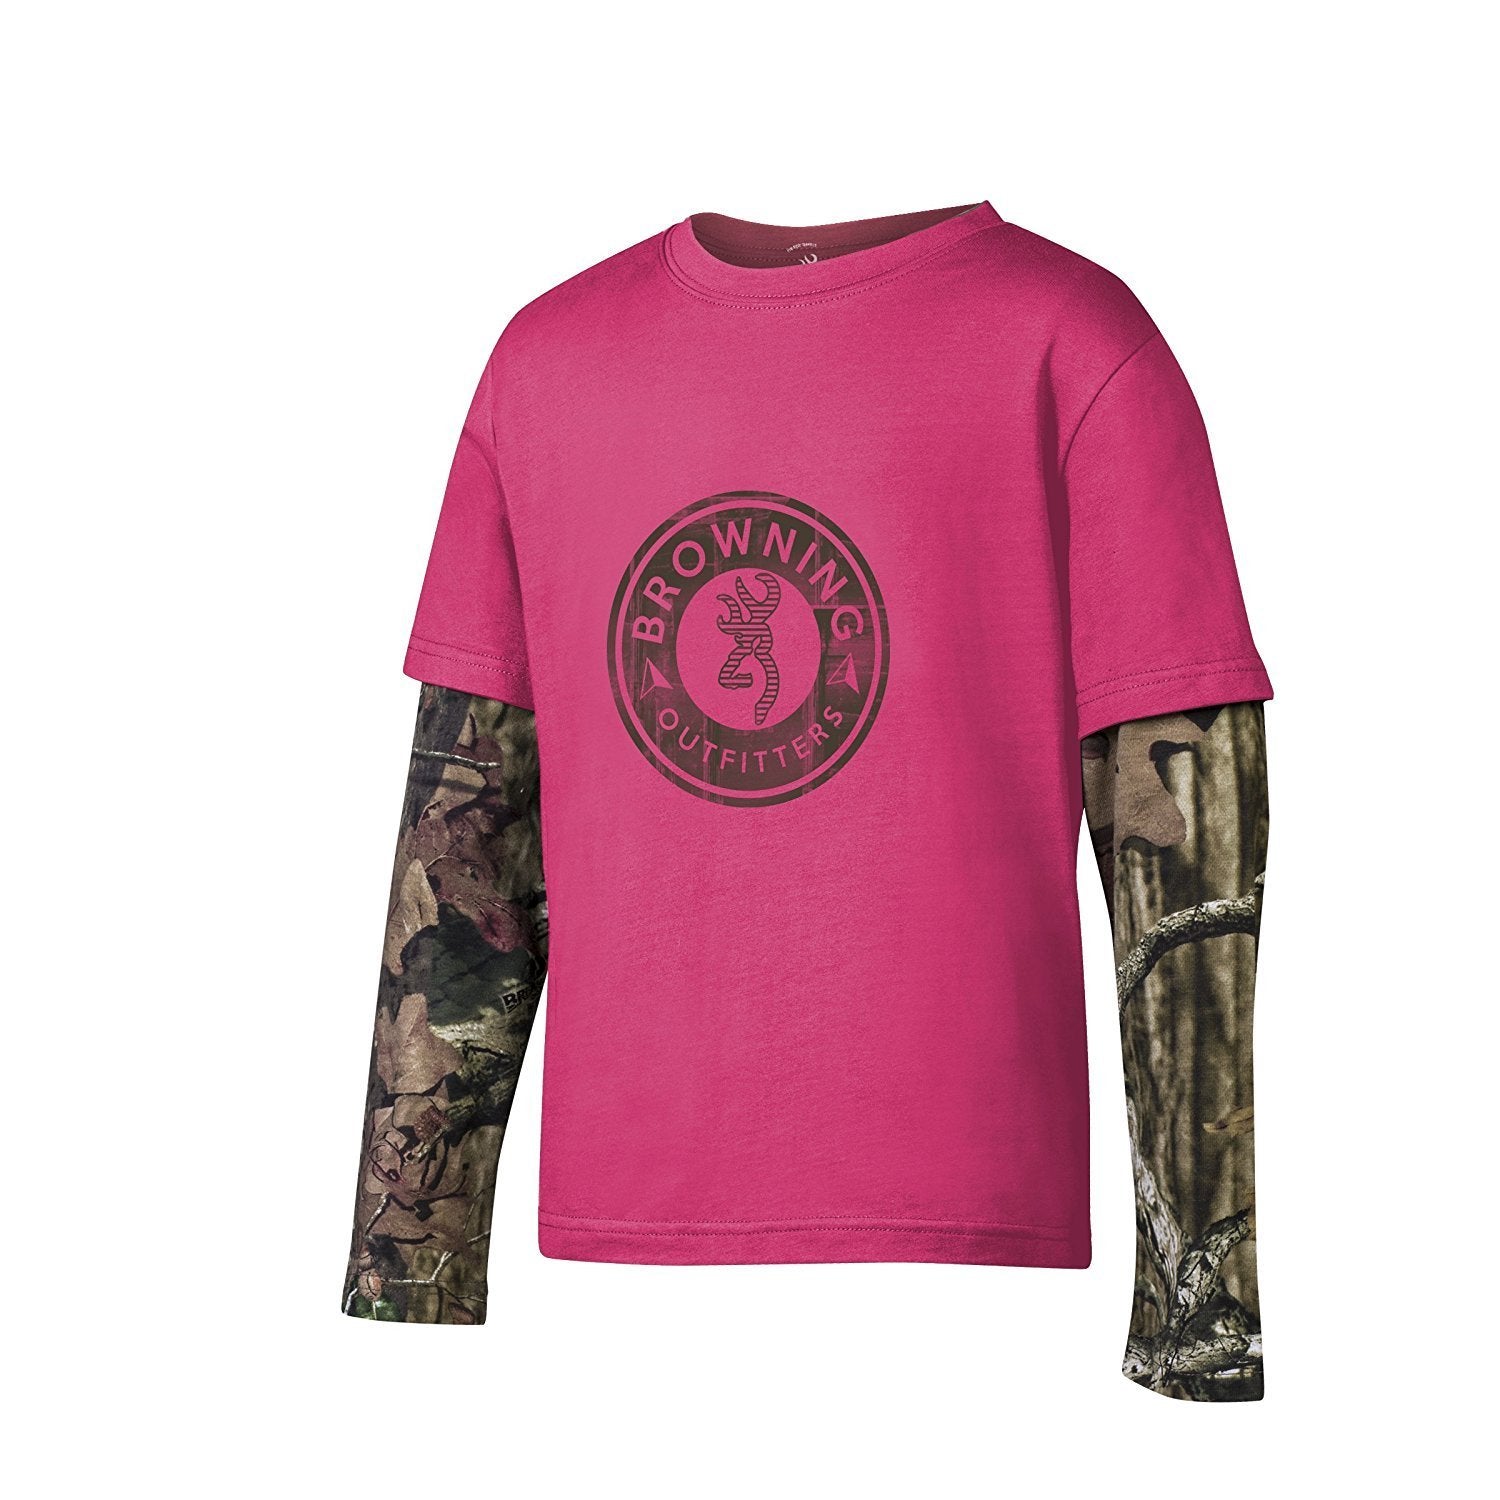 Wear Jeb\'s Layered and Camo Med Sleeve Outdoor – Fuchsia, Western, Ryder Youth Tee Work, Long Browning T-shirt